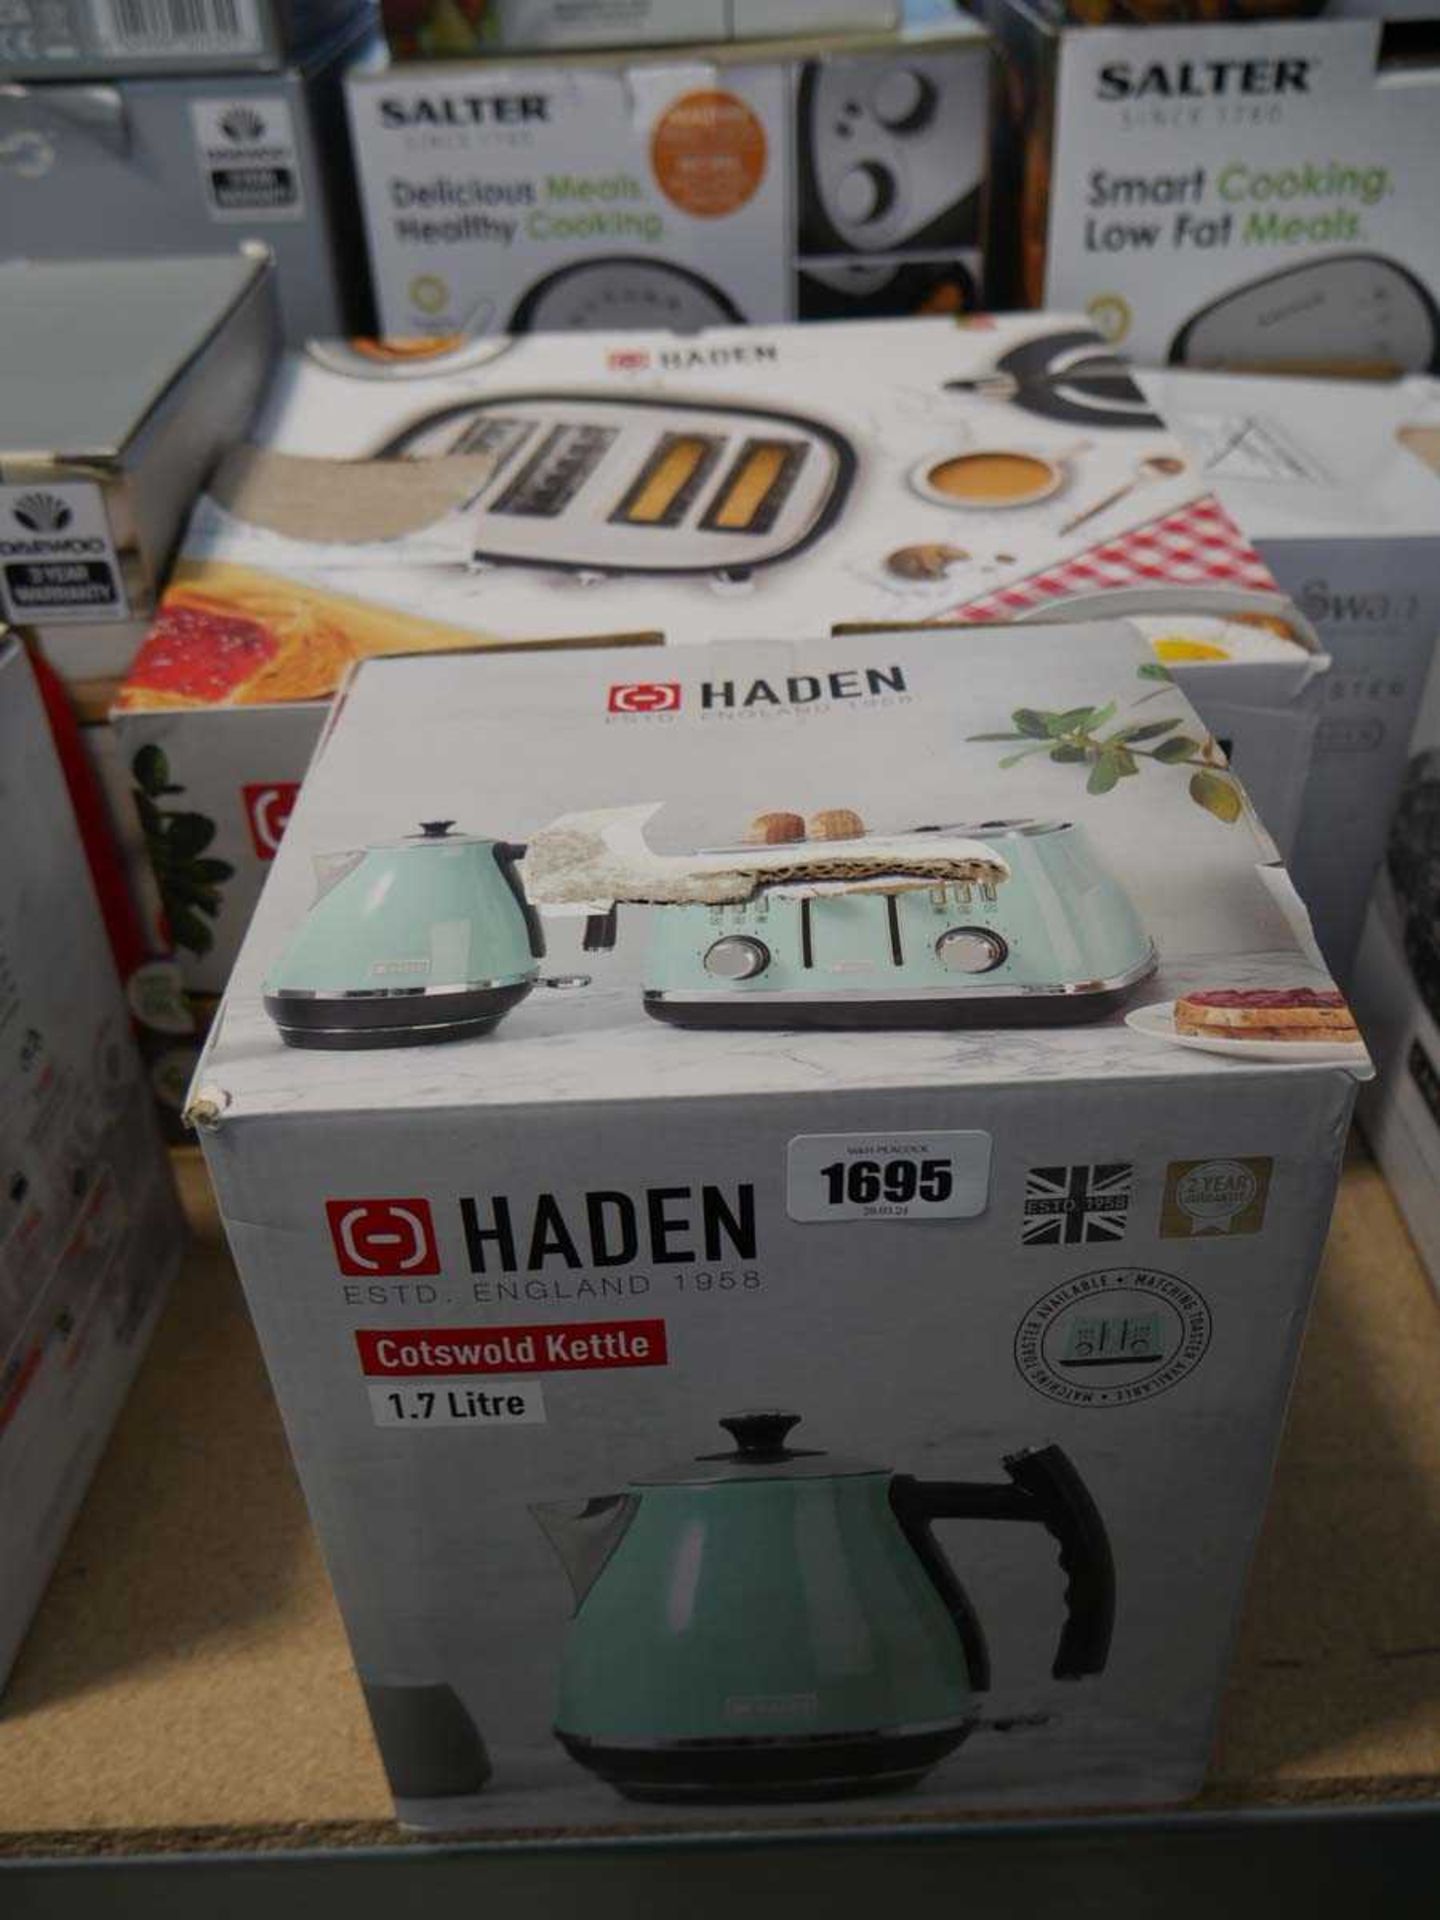 Haden Jersey 4 slice toaster and Haden Cotswold kettle